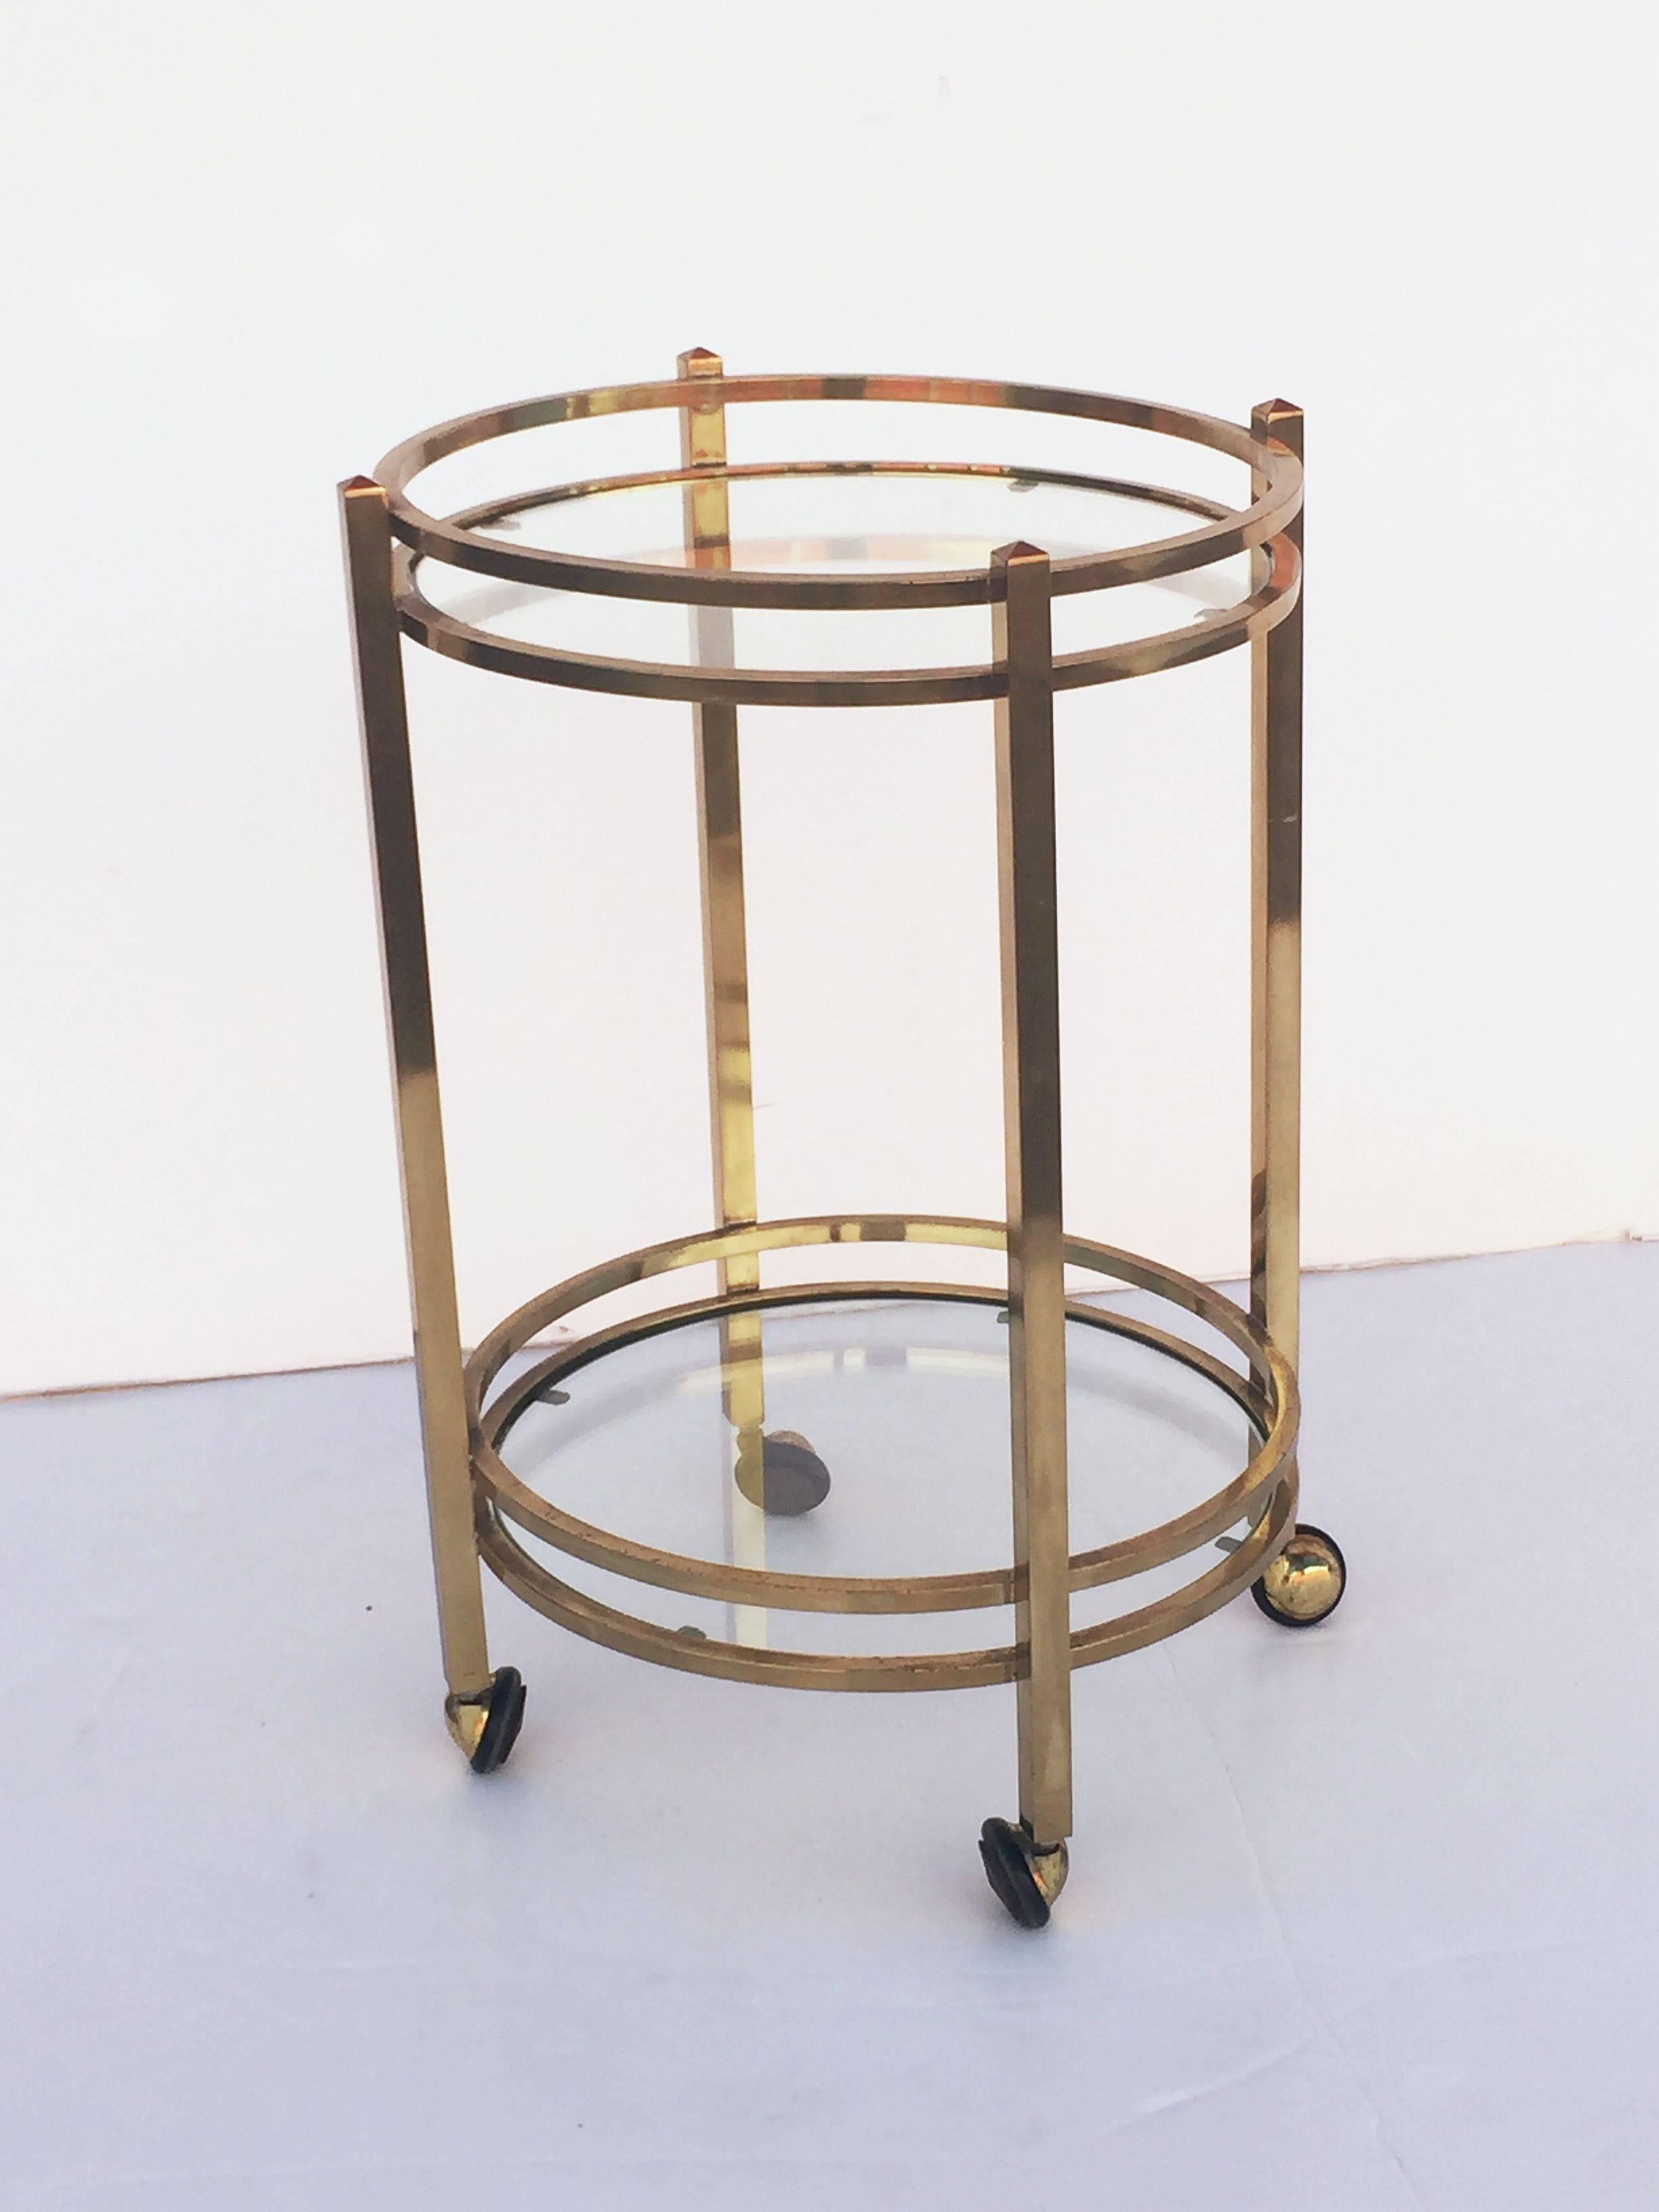 A fine French round table of brass with two concentric circle tiers of inset glass, set upon rolling casters.

Great as a drinks trolley or bar cart as well.